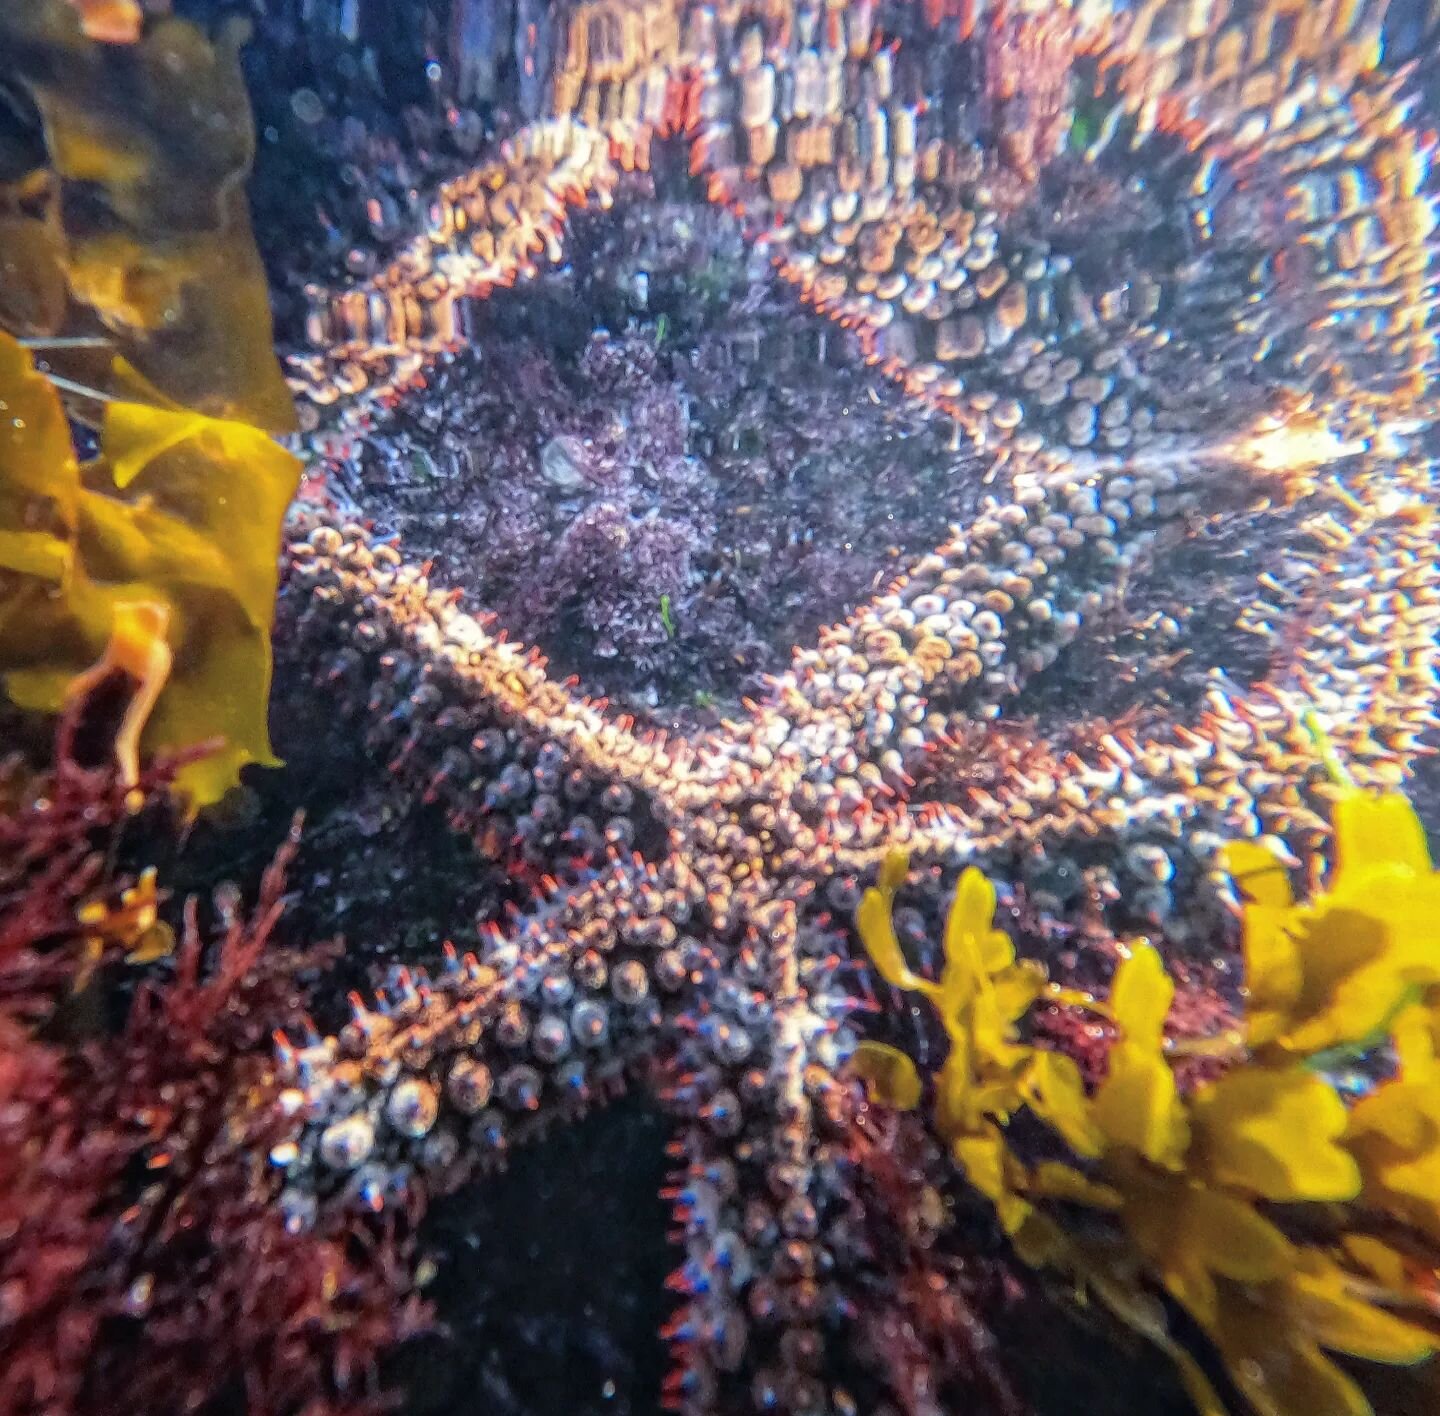 These critters are our tide pool &quot;stars!&quot; Fragile rainbow stars can be fairly big compared to other tide pool animals, so be on the lookout!
.
.
.
#seastar #starfish #tidepools #lowtide #california #southerncalifornia #sandiego #nature #exp